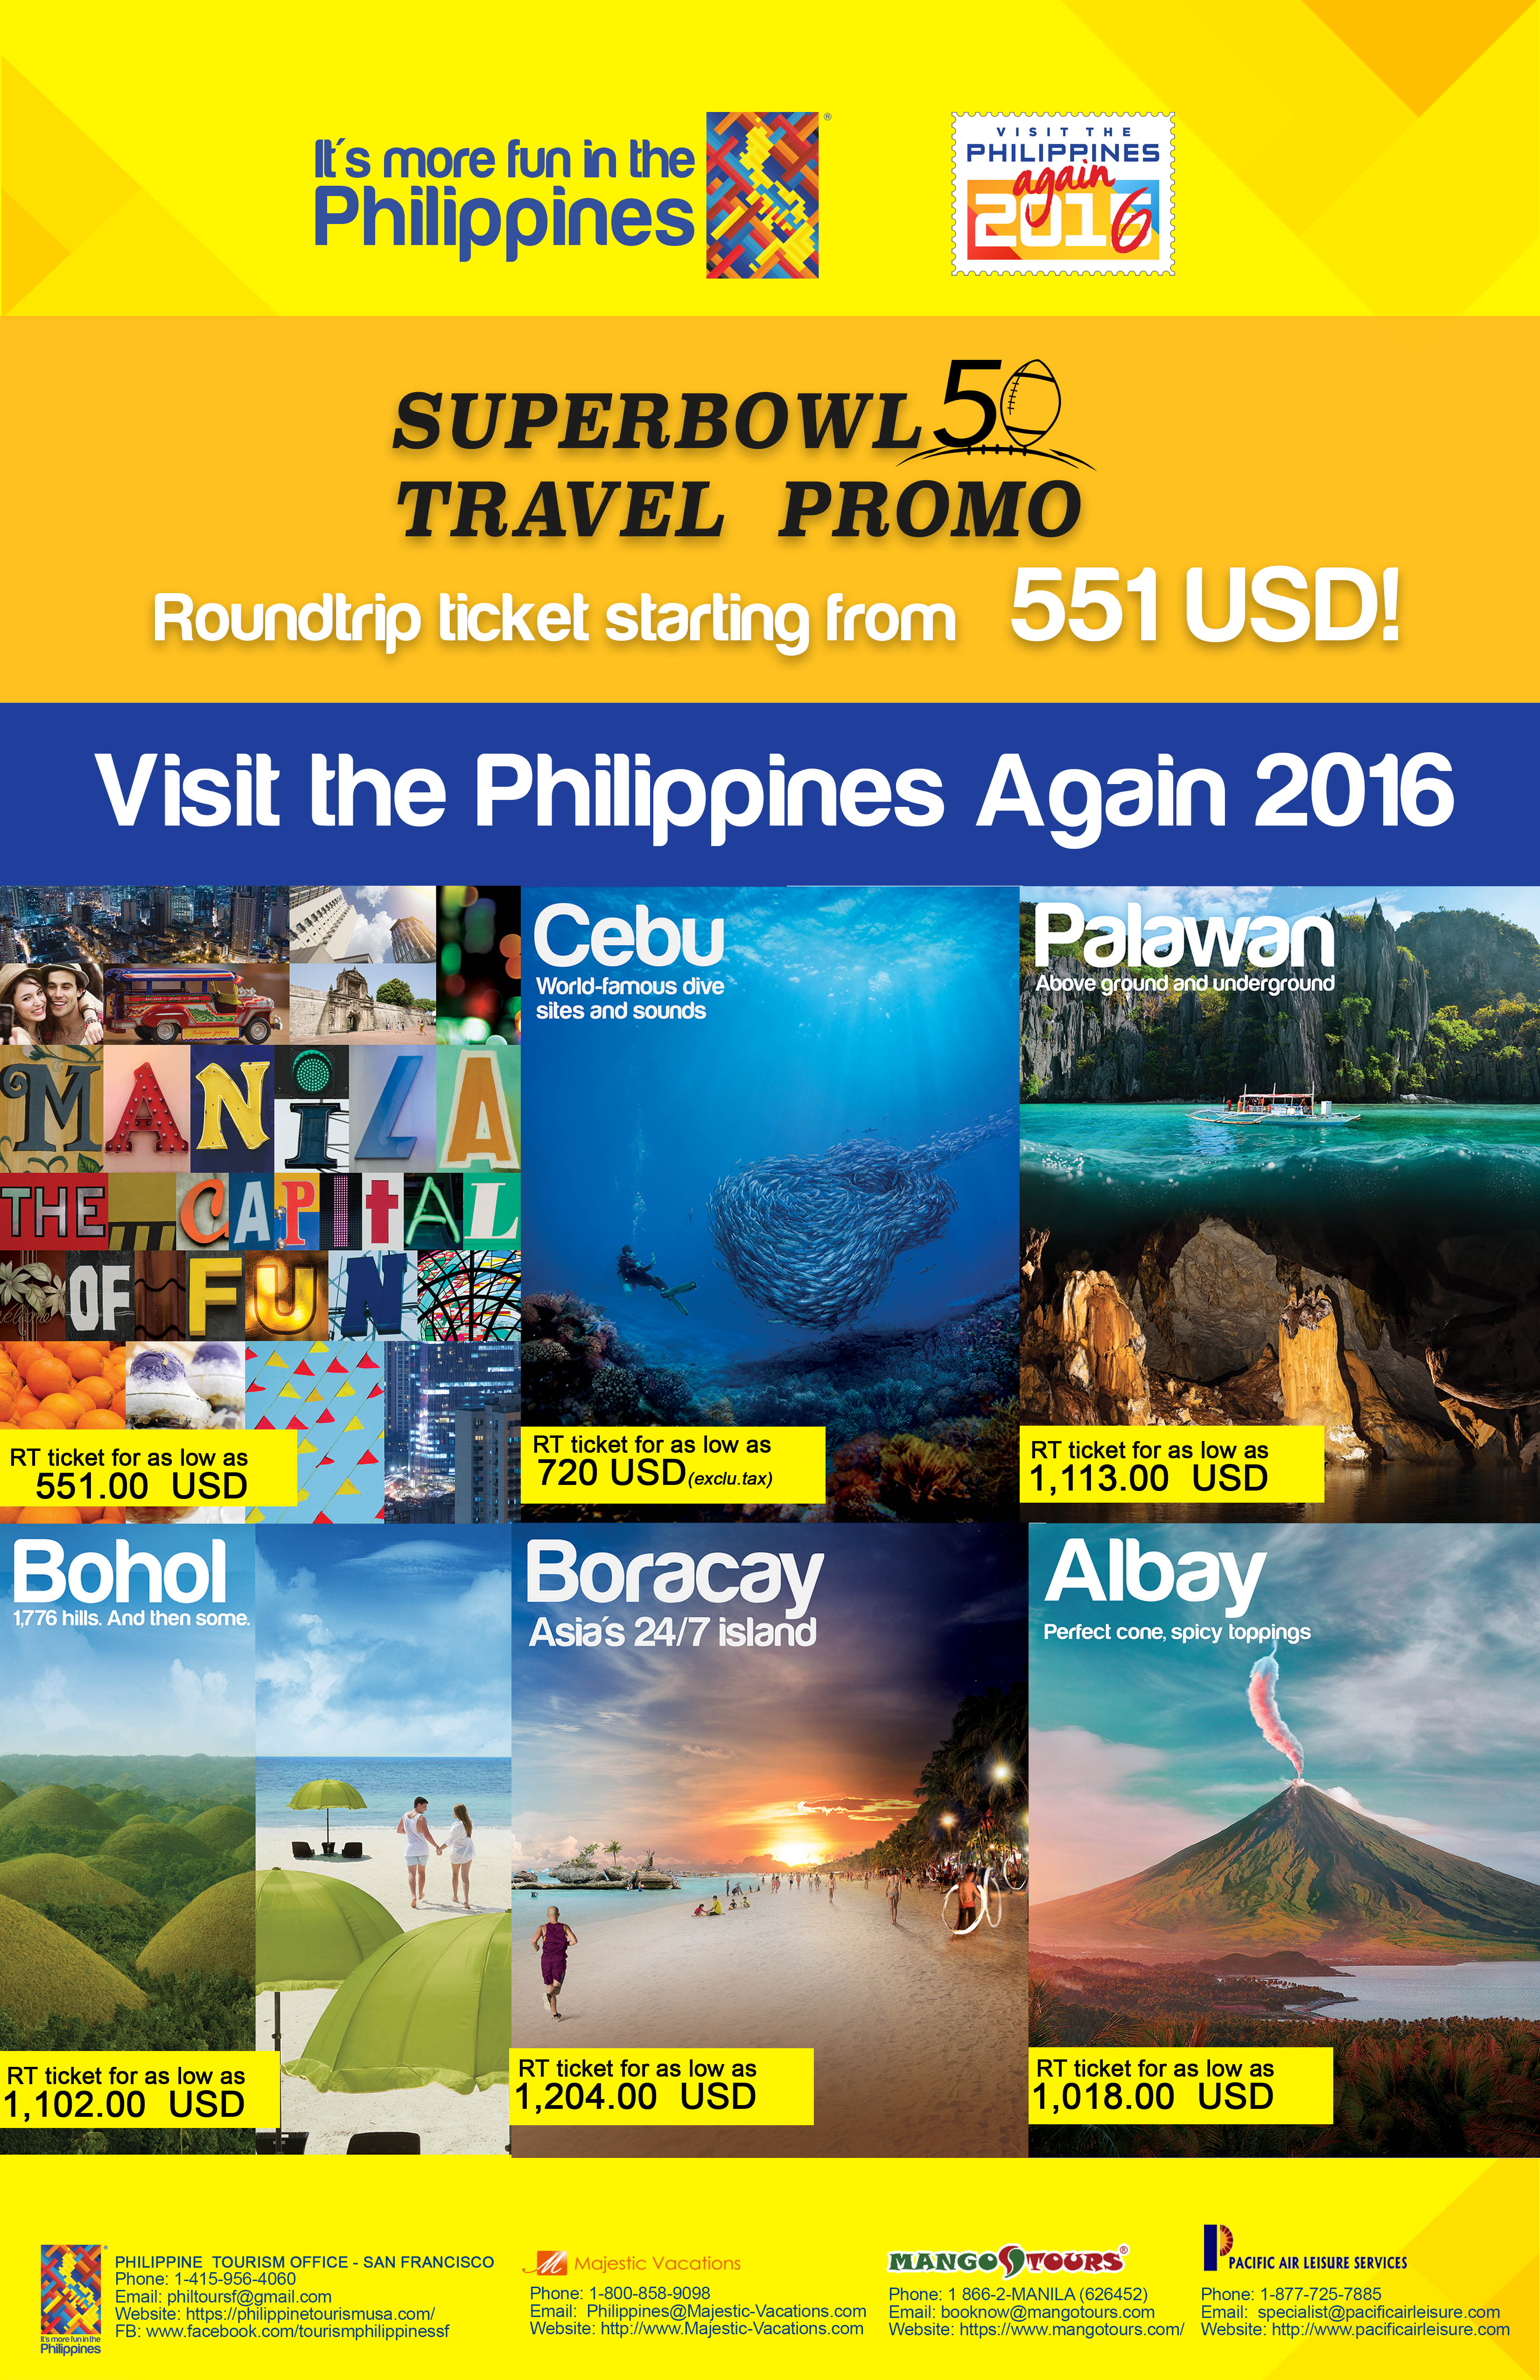 tourism related articles in the philippines